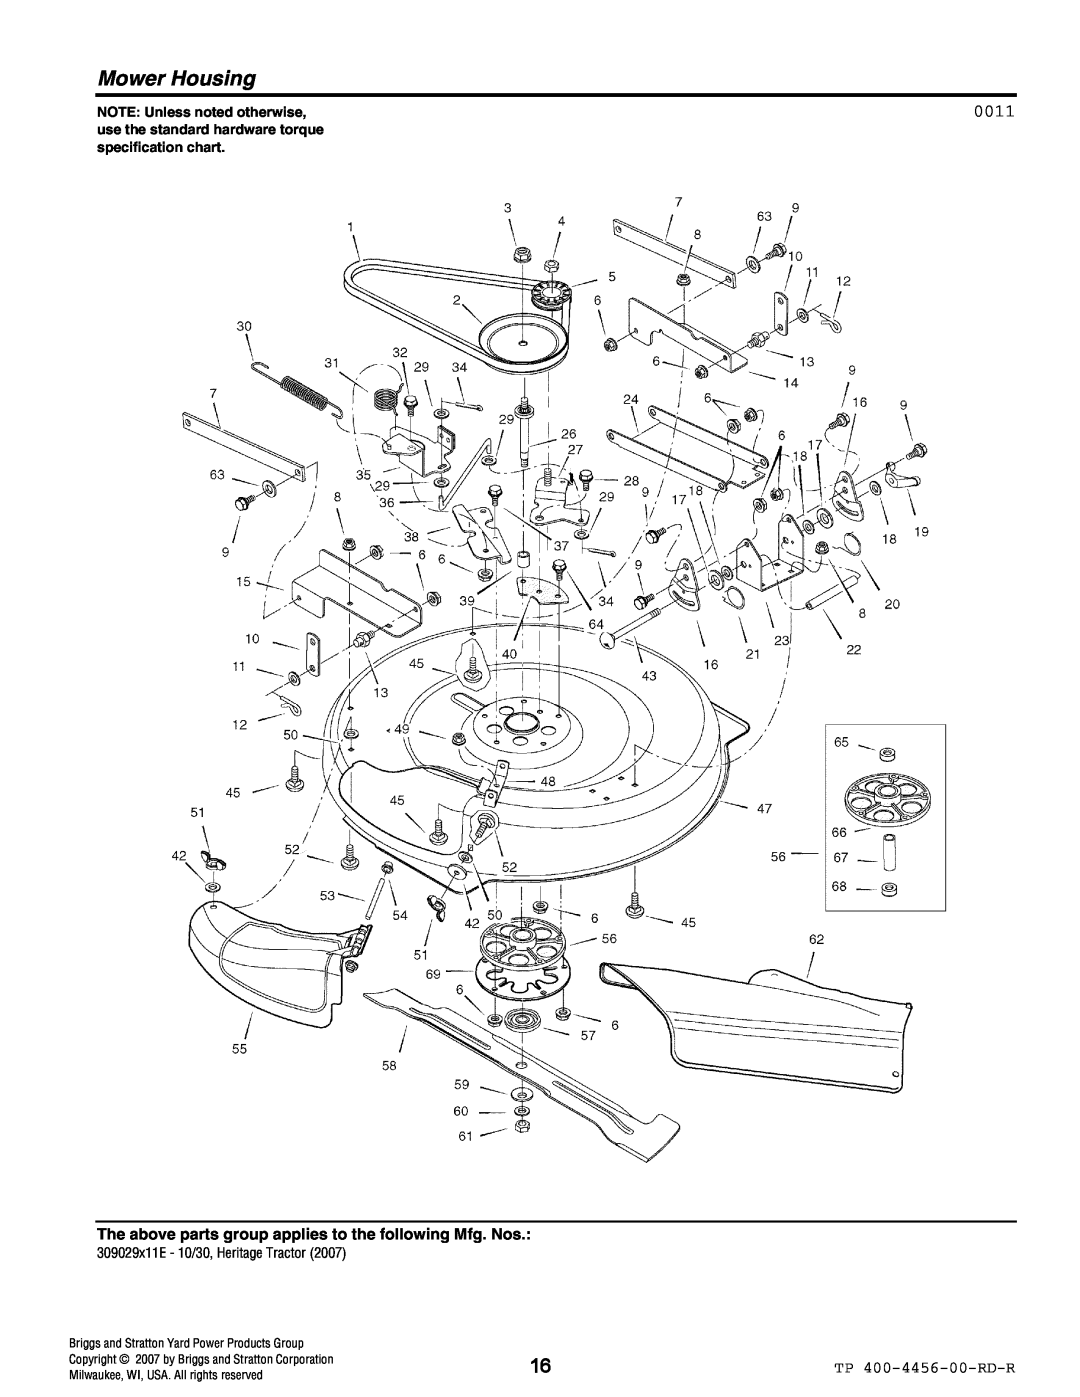 Hayter Mowers 10/30 manual Mower Housing, 0011, TP 400-4456-00-RD-R, NOTE: Unless noted otherwise 